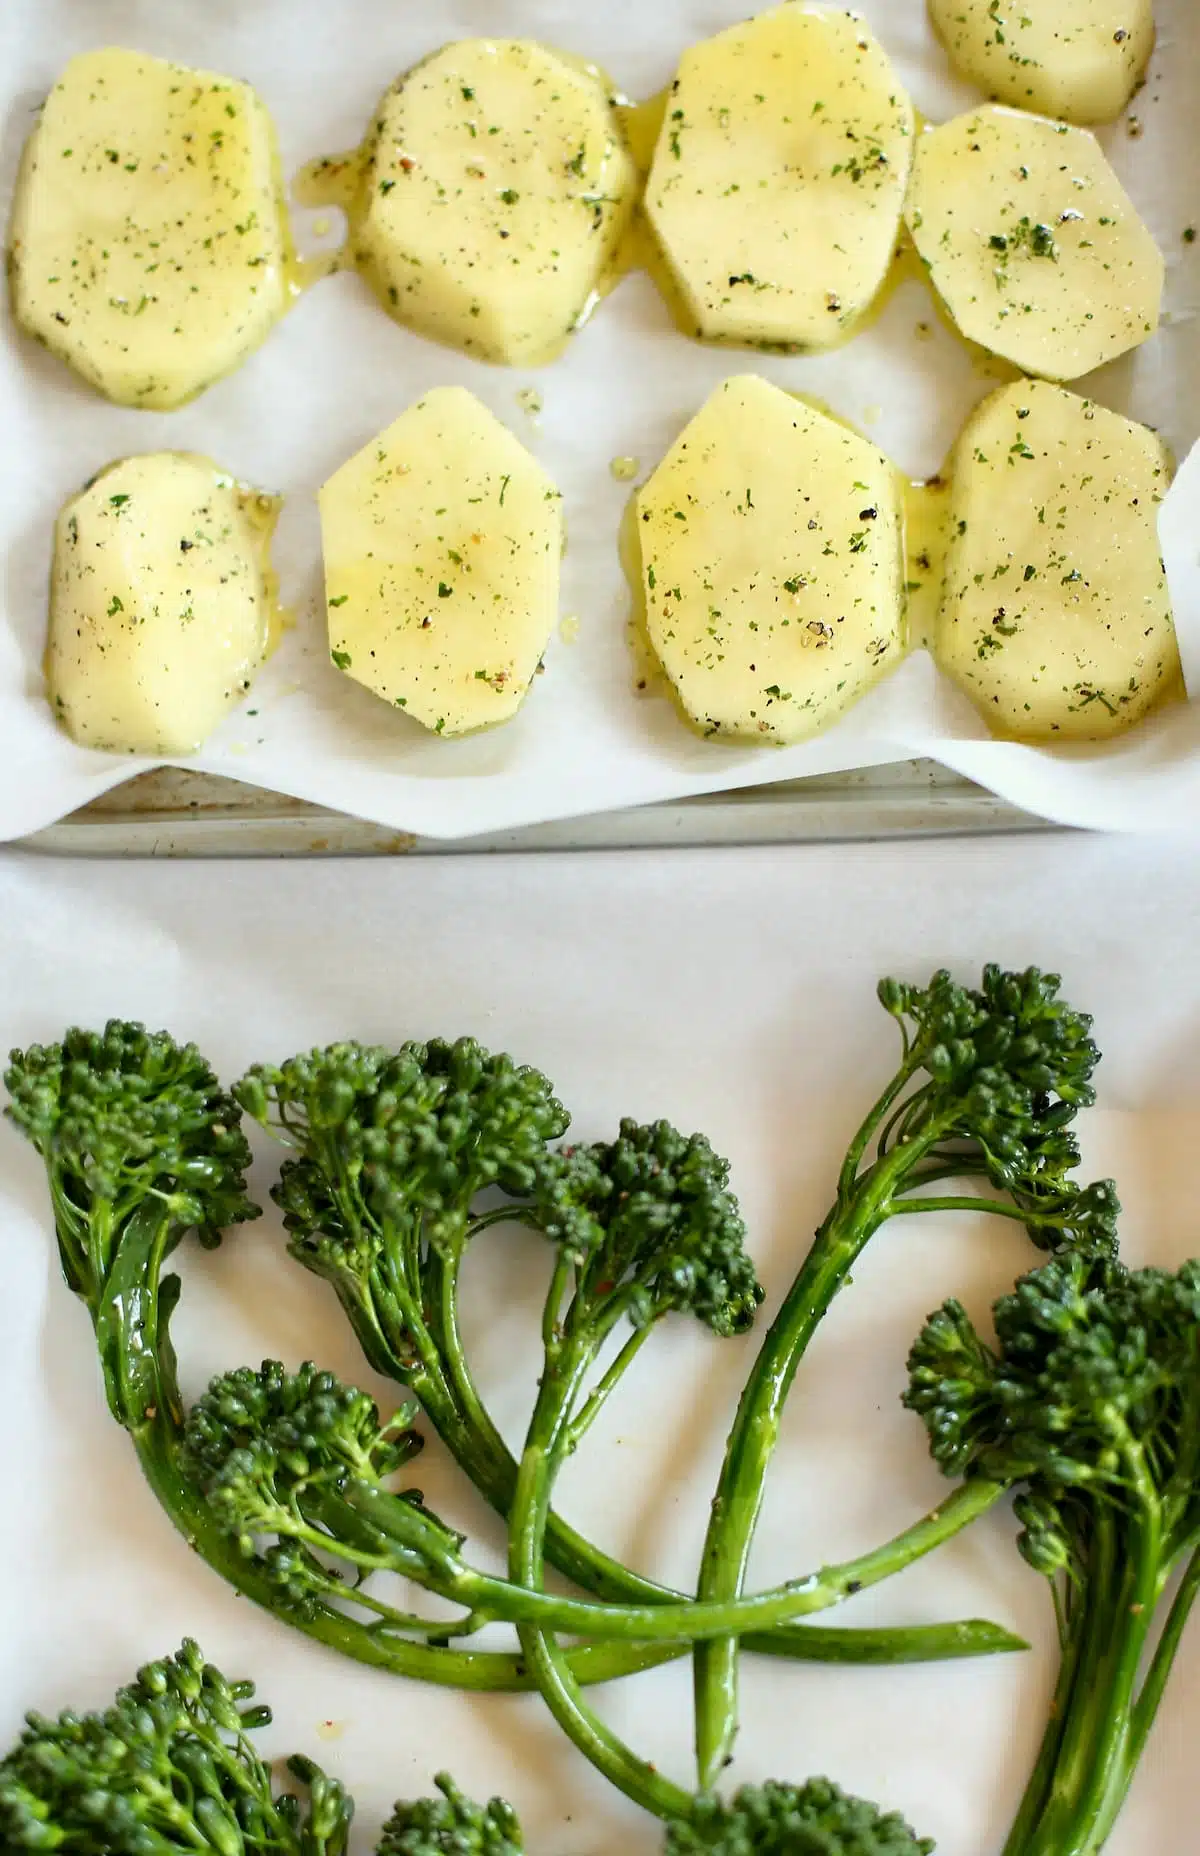 a baking sheet of potatoes and broccolini.